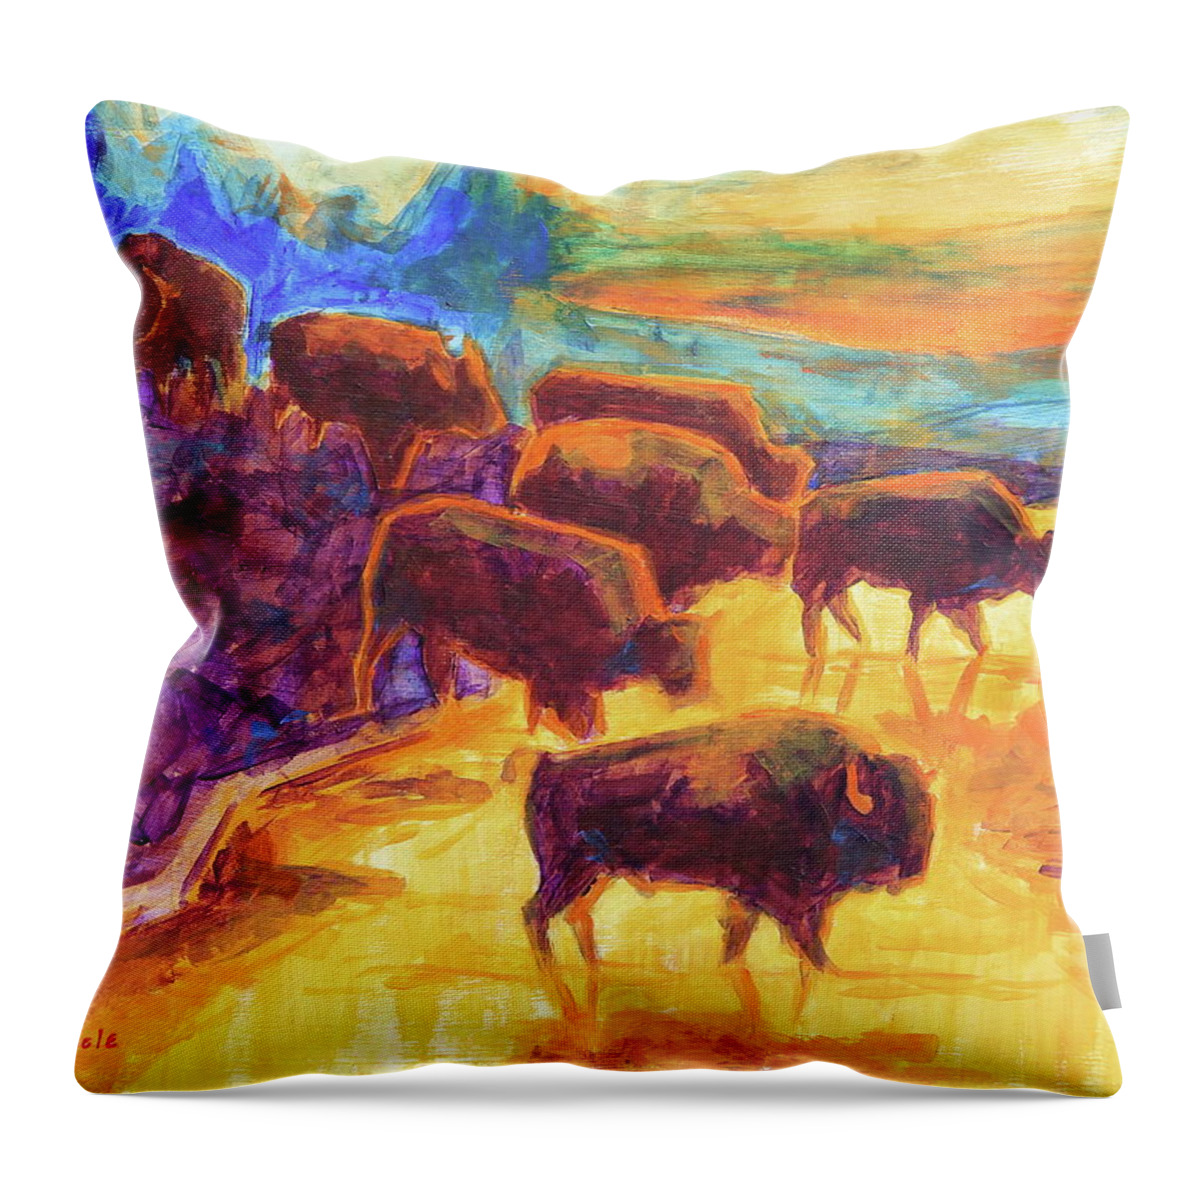 Western Buffalo Art Throw Pillow featuring the painting Western Buffalo Art Bison Creek Sunset Reflections painting T Bertram Poole by Thomas Bertram POOLE